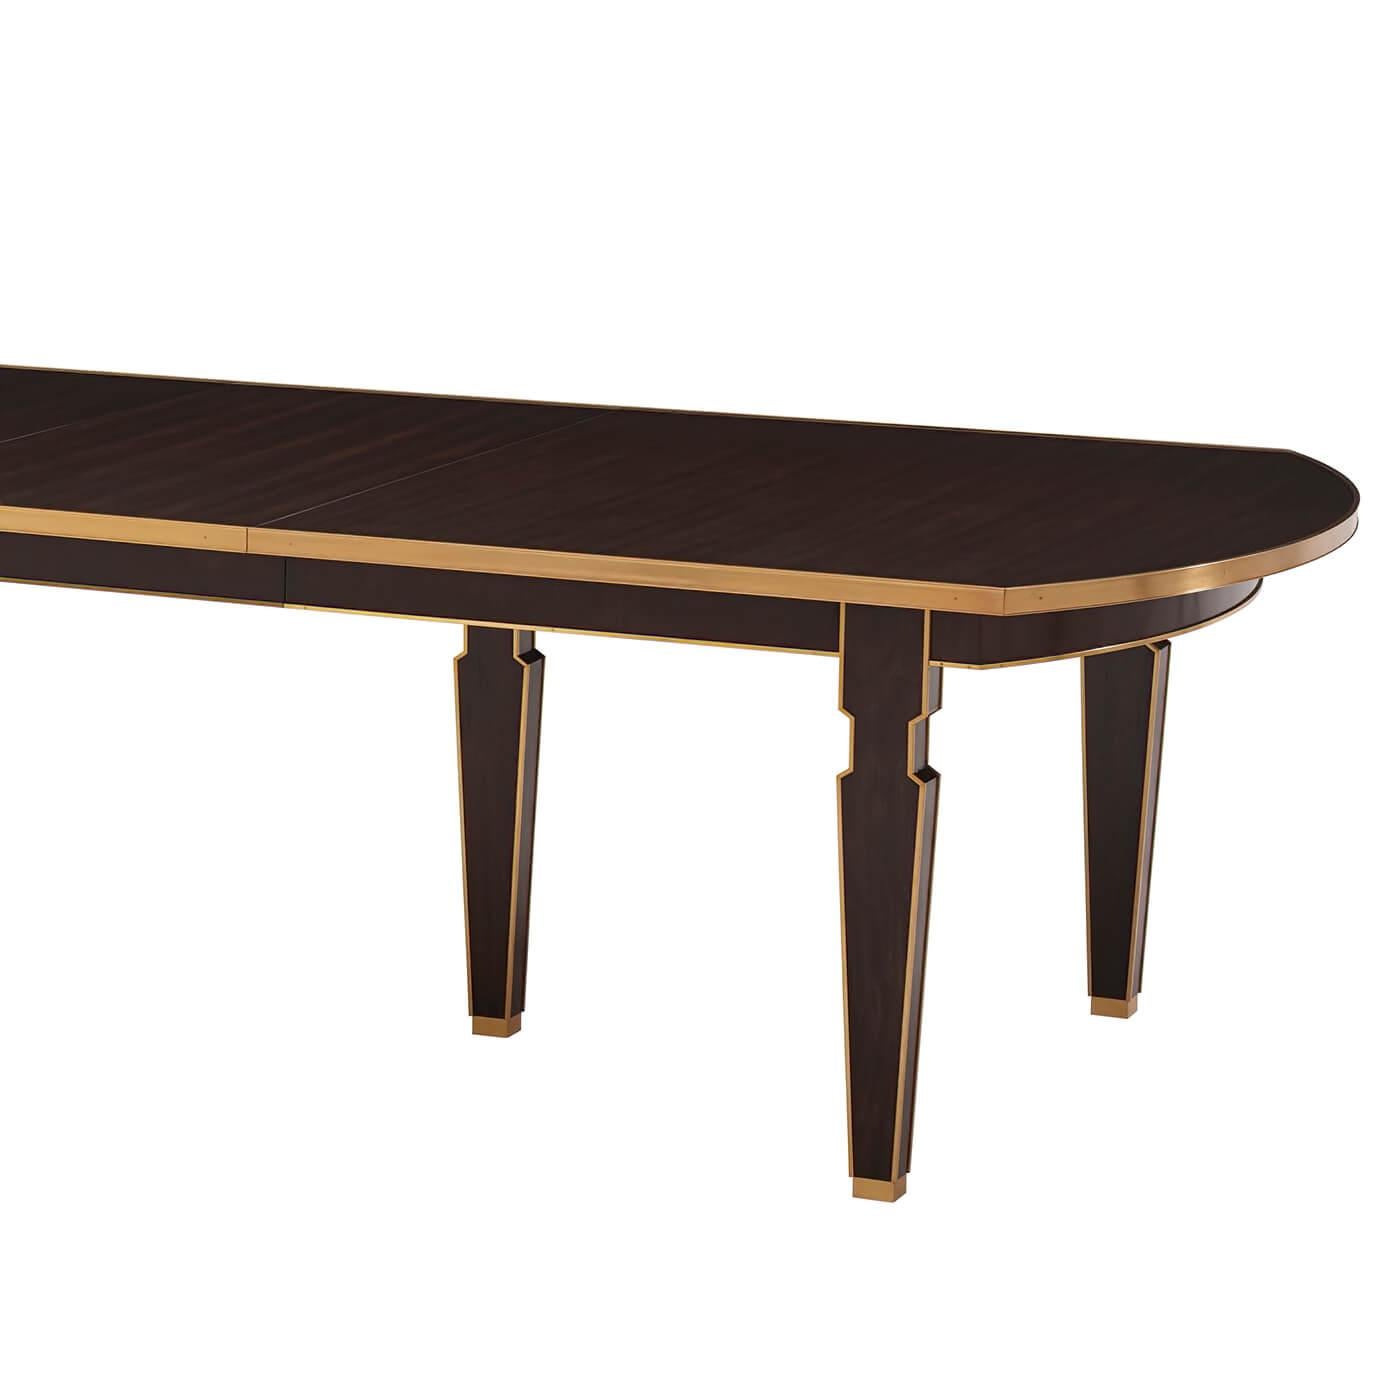 Vietnamese Art Deco Style Extension Dining Table For Sale